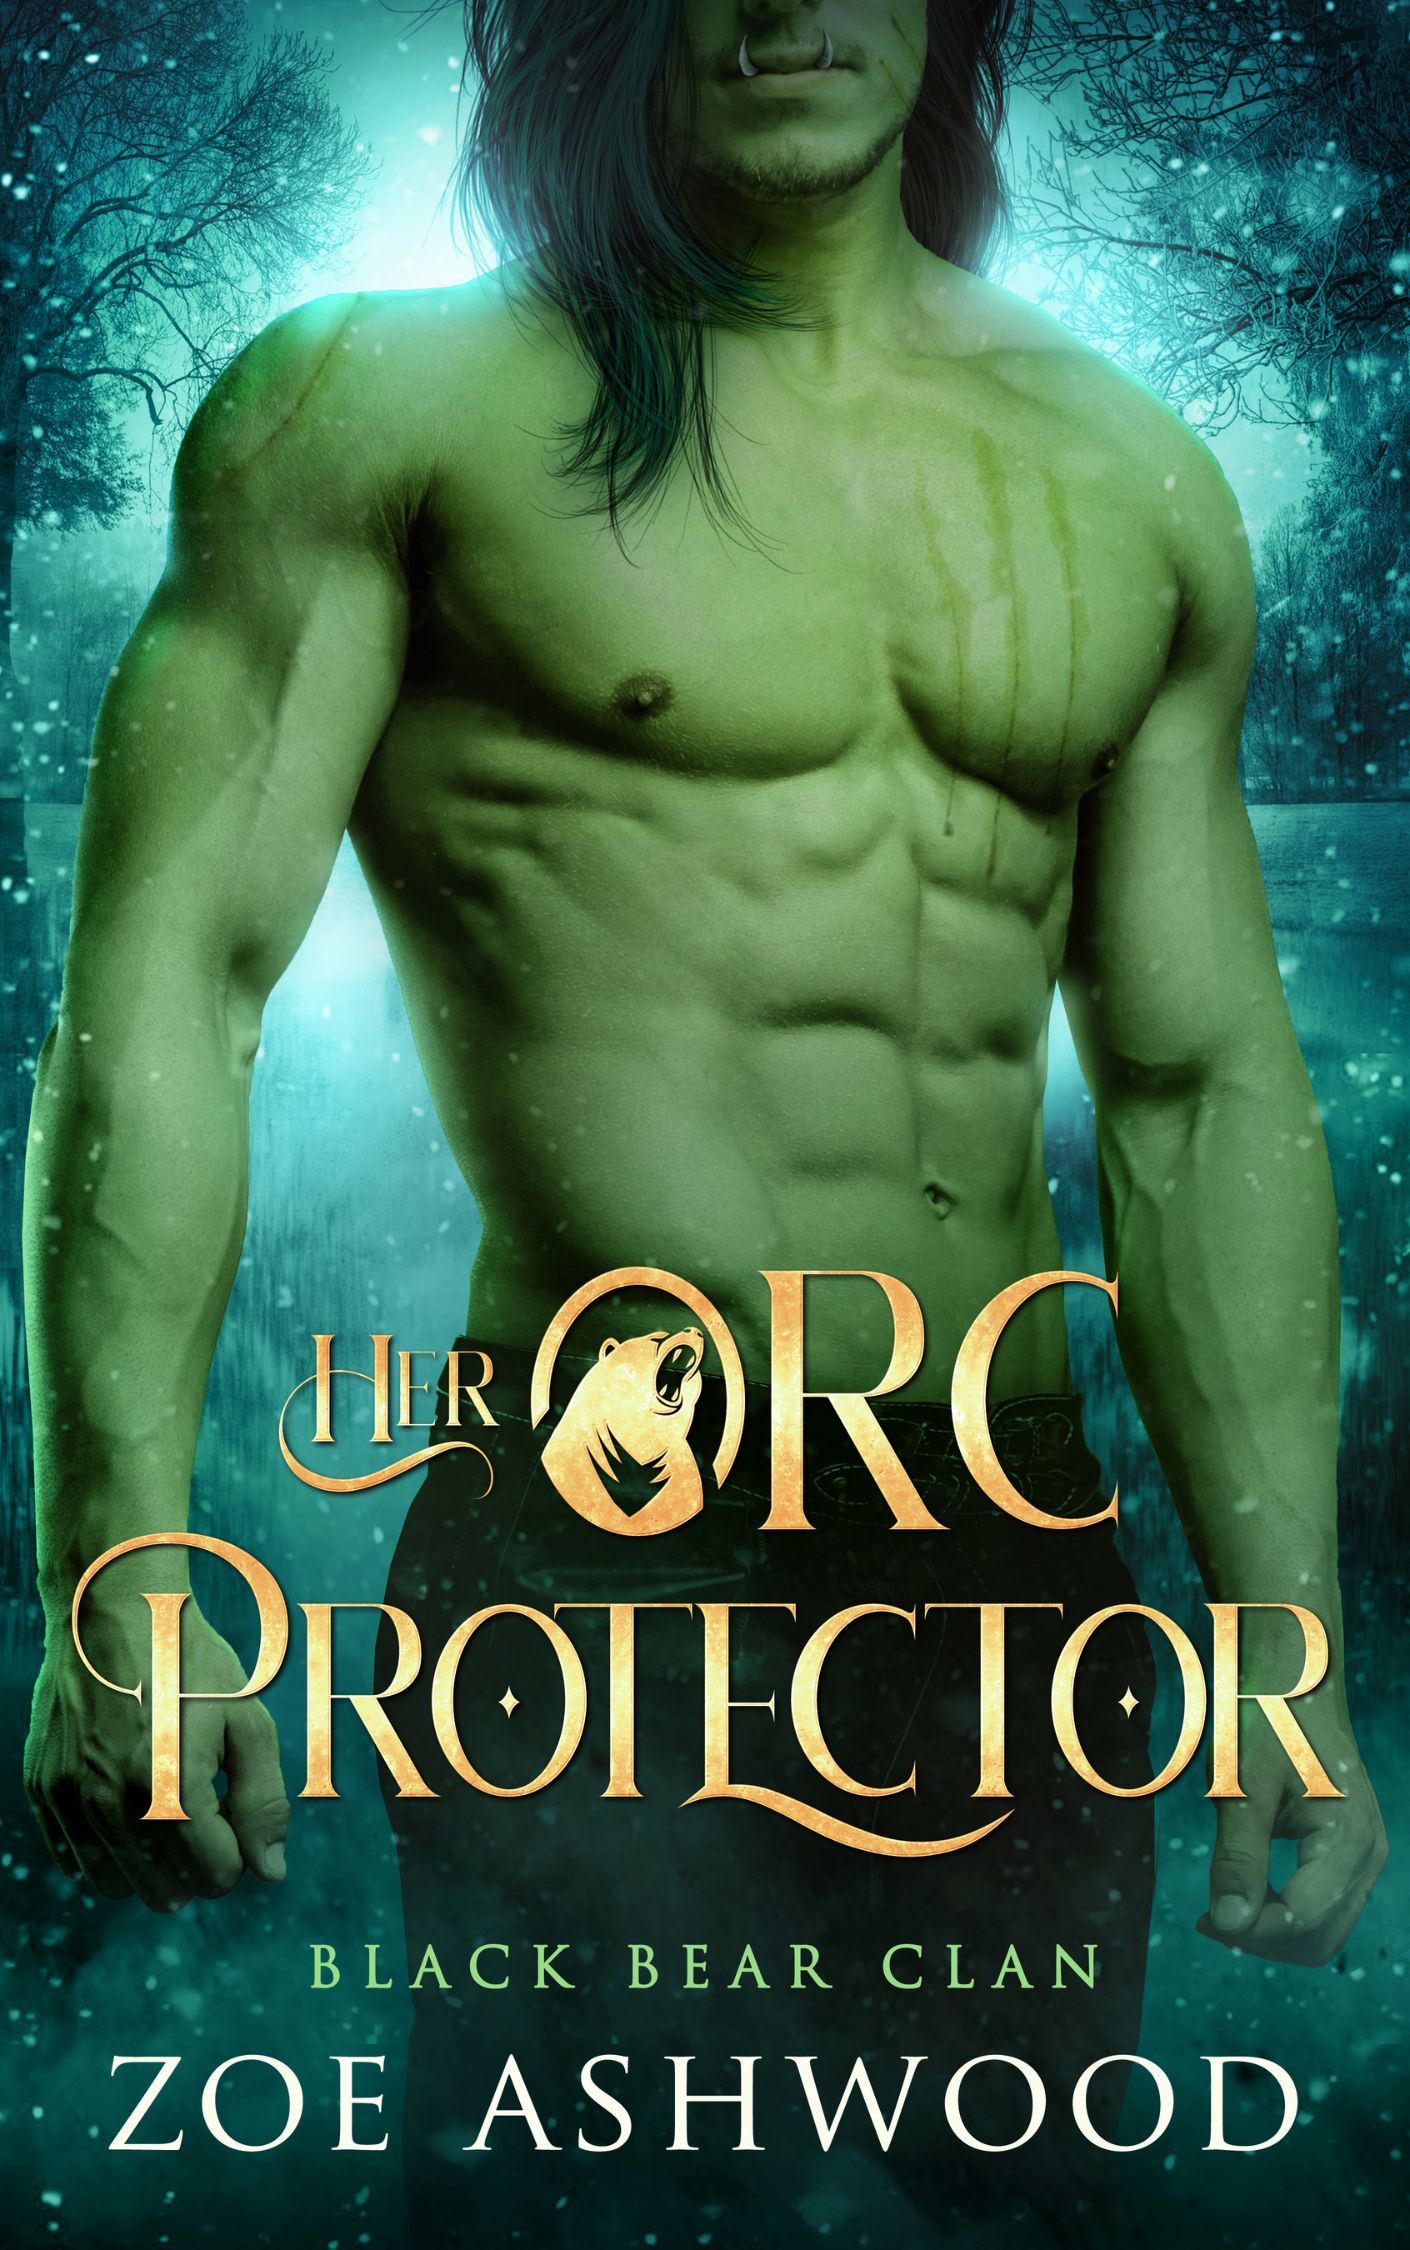 Her Orc Protector - Black Bear Clan - a monster fantasy romance by Zoe Ashwood